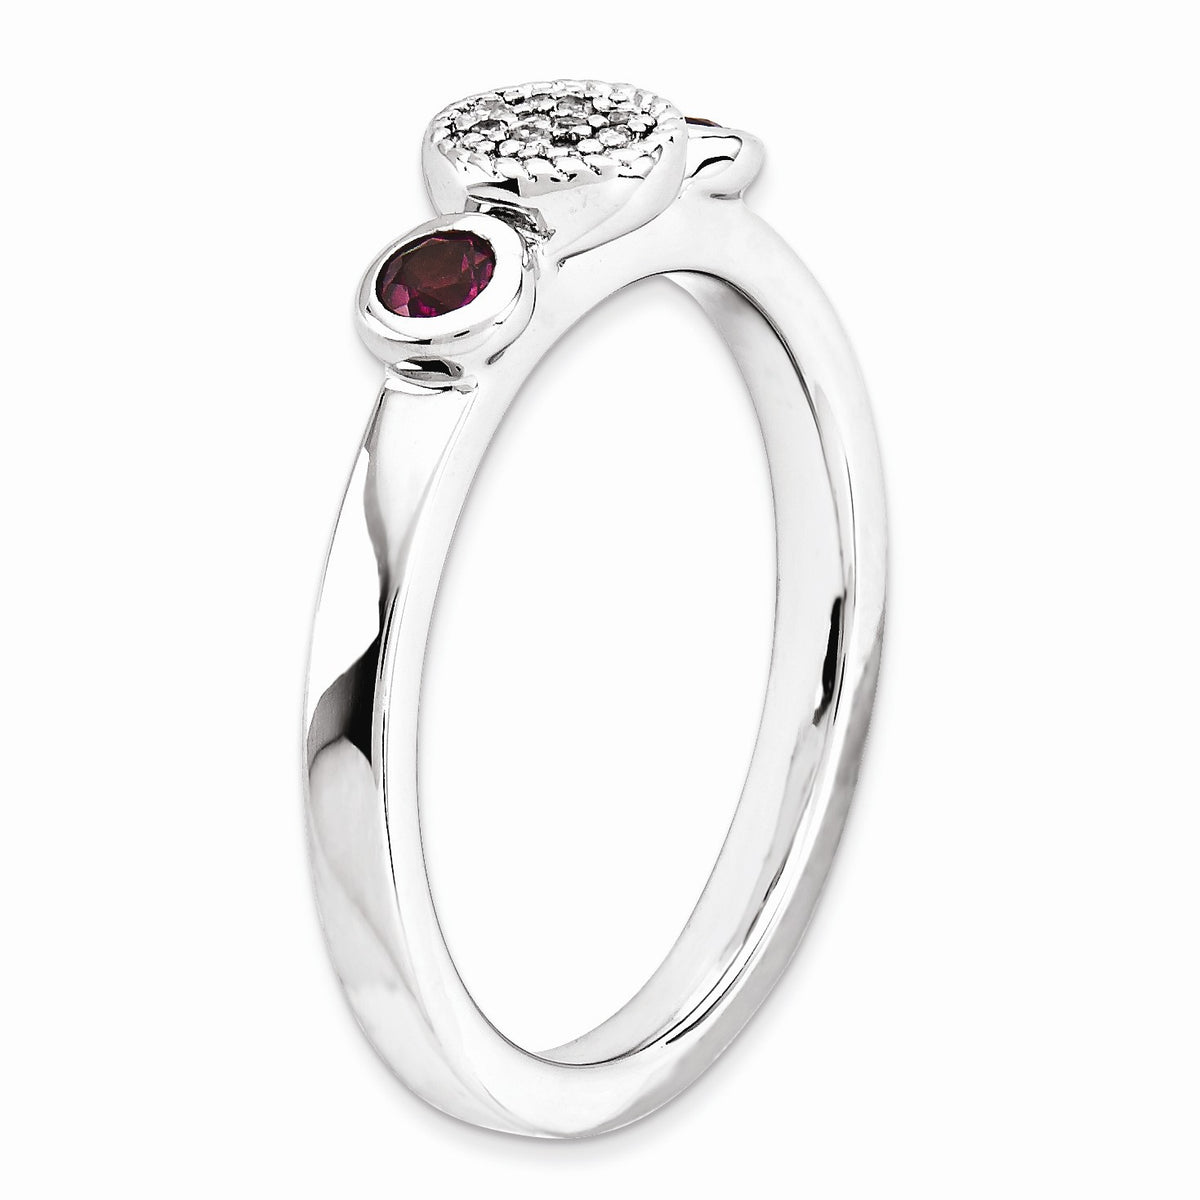 Alternate view of the Sterling Silver Stackable Rhodolite Garnet &amp; .05Ctw HI/I3 Diamond Ring by The Black Bow Jewelry Co.